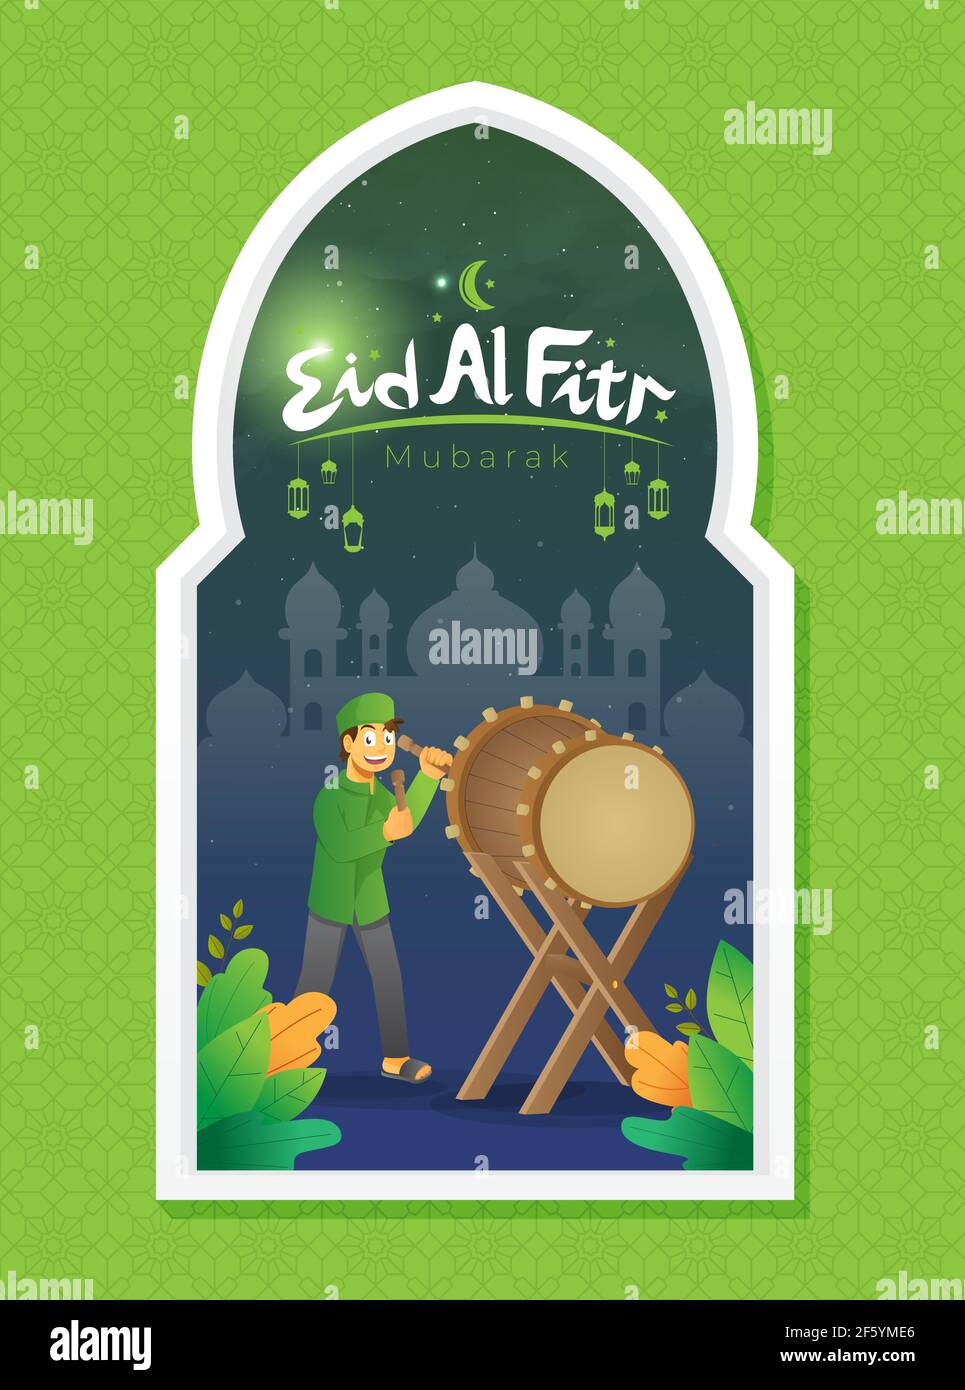 Eid al fitr vector greetings card with a boy hitting a ceremonial drum Stock Vector